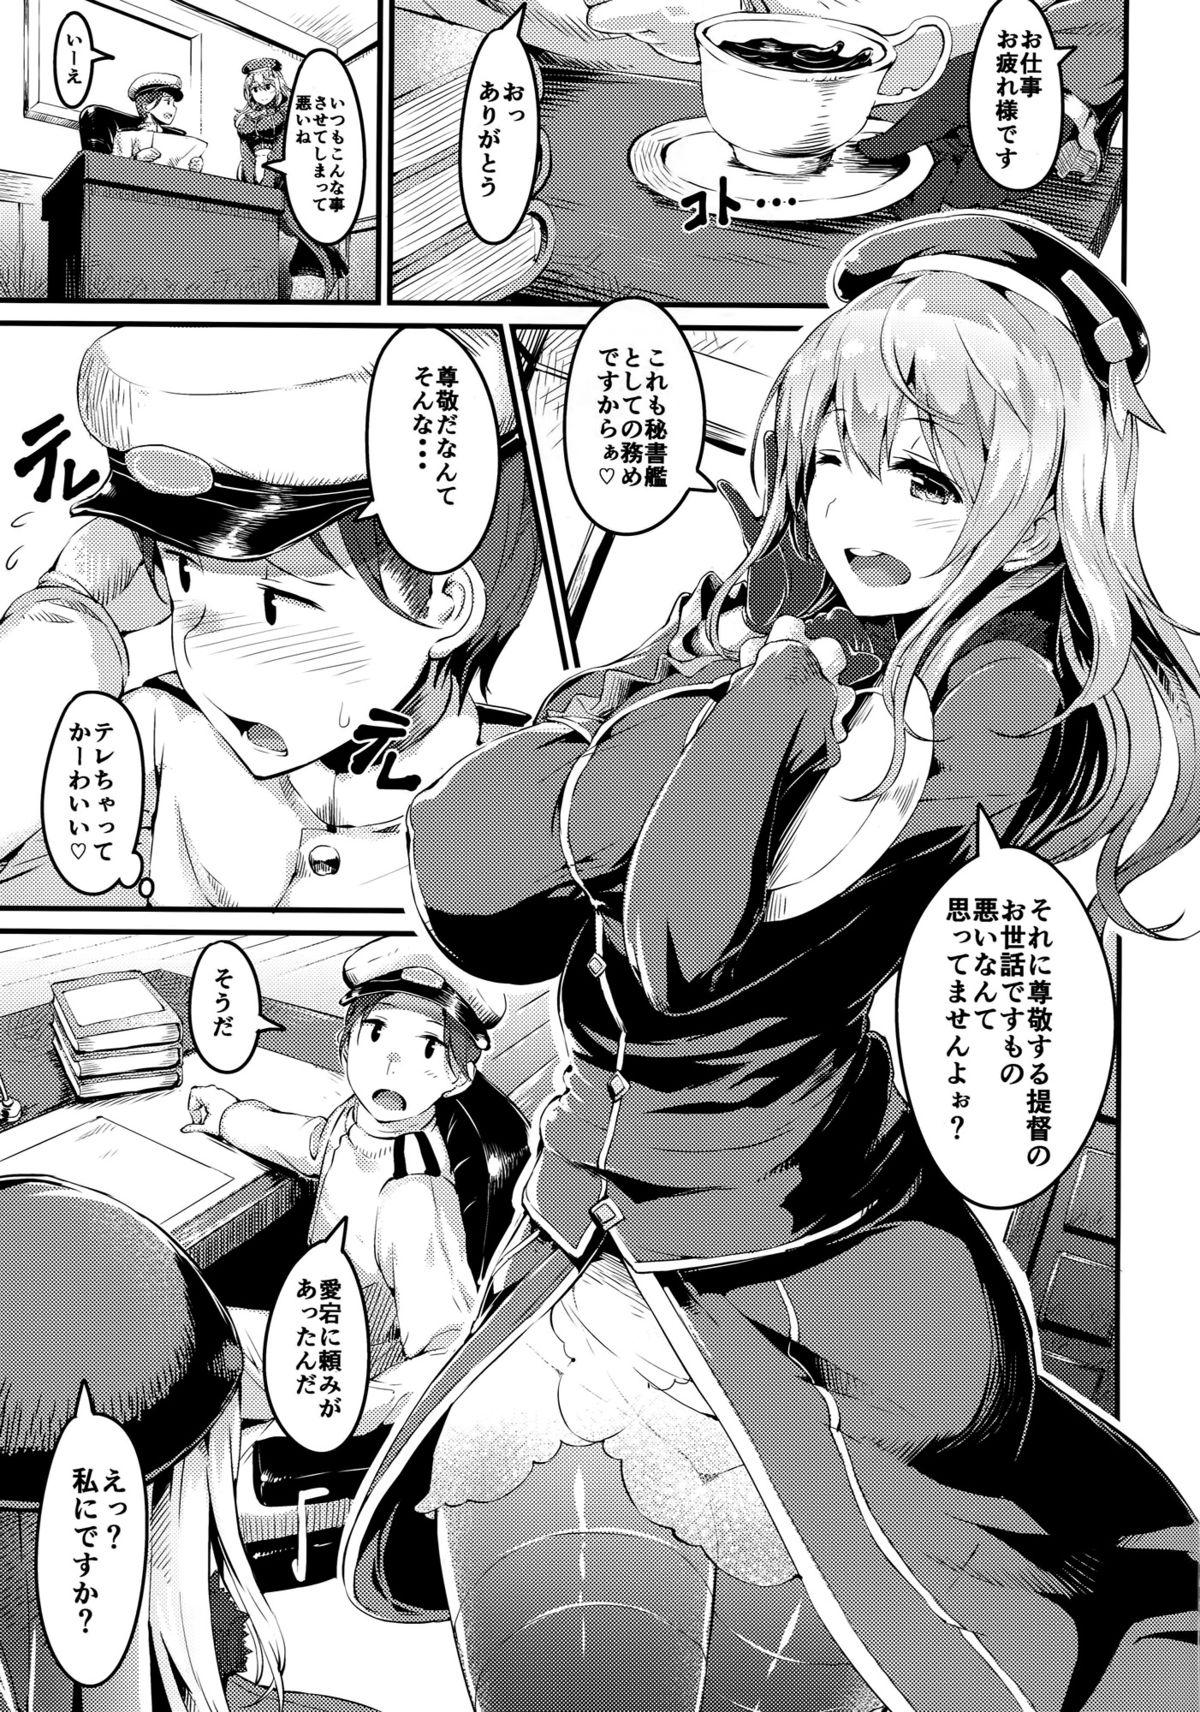 Best Blowjobs Ever ATG - Kantai collection Pain - Page 2